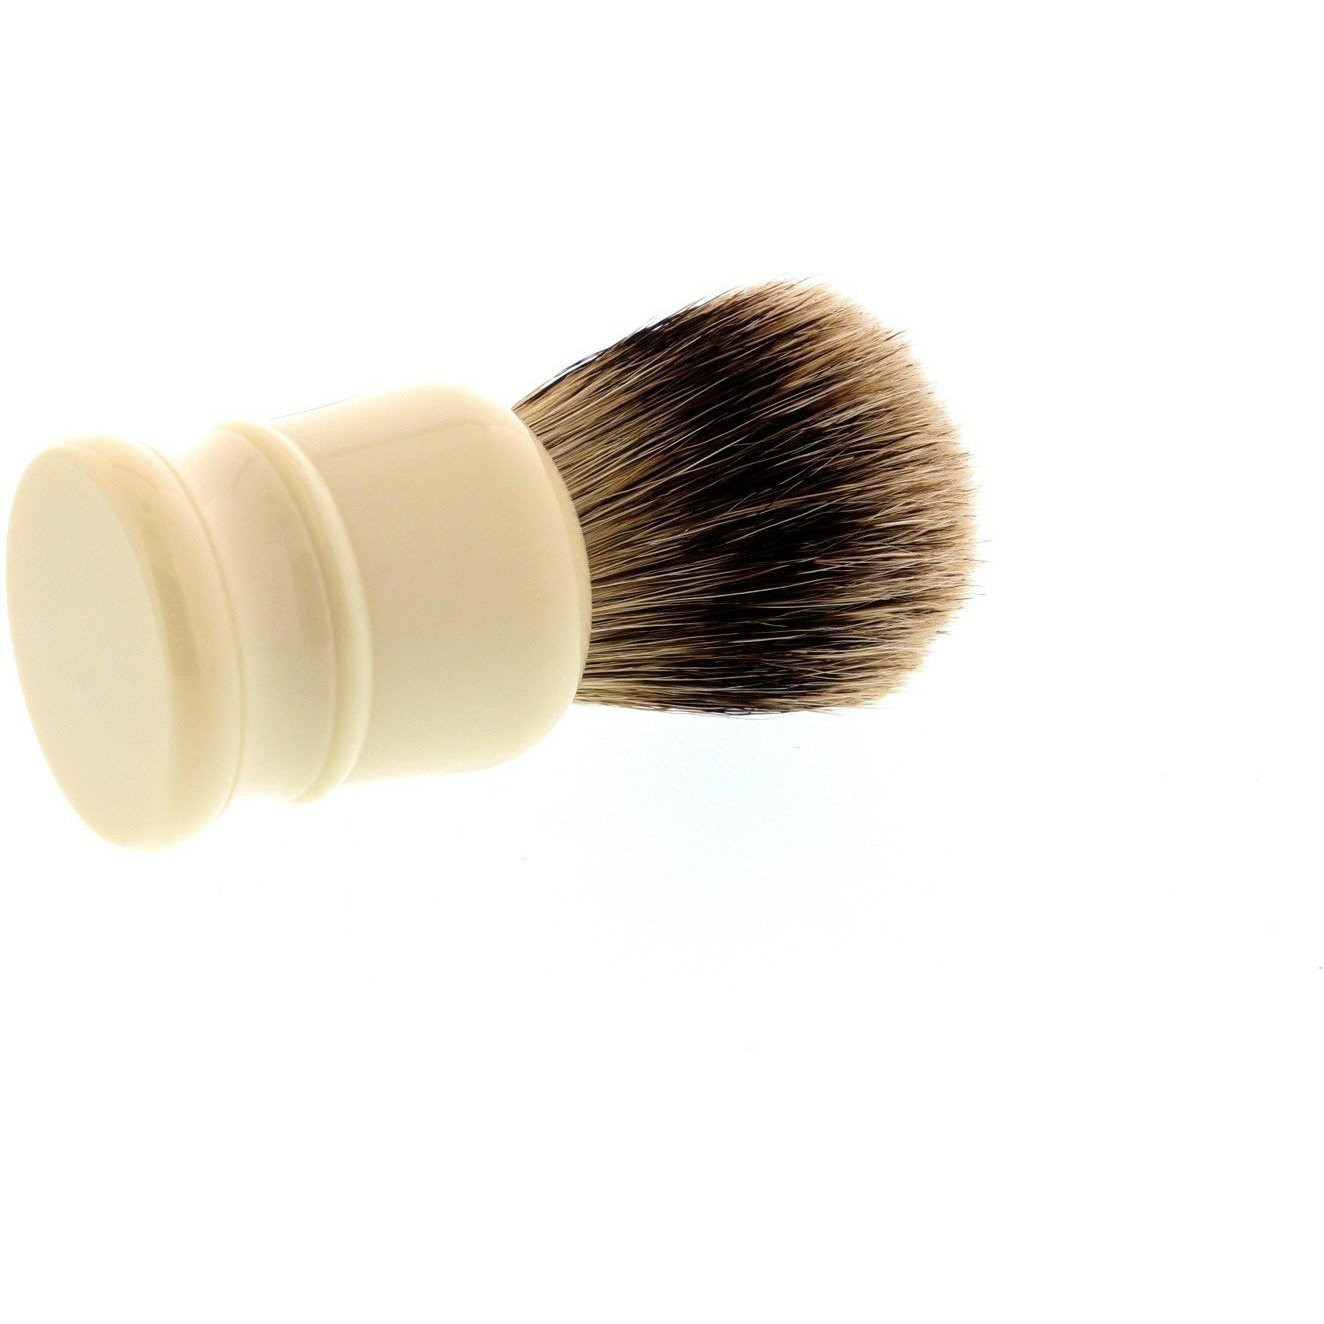 Product image 3 for Simpson Classic CL 1 Best Badger Shaving Brush (CL1B)